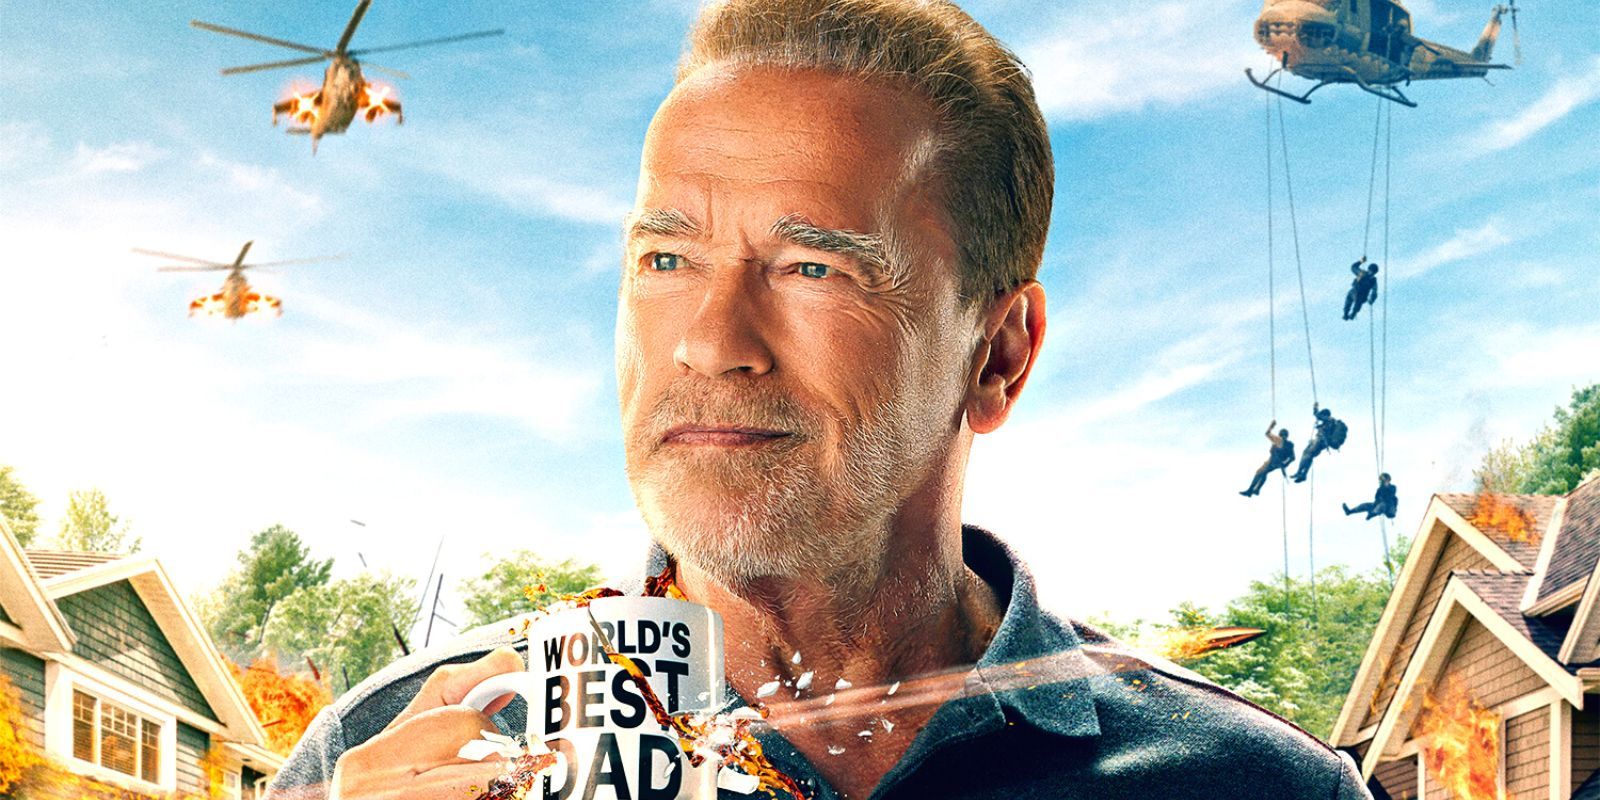 Arnold Schwarzenegger holding a coffee mug that's being shattered by a bullet while two helicopters soar in the background